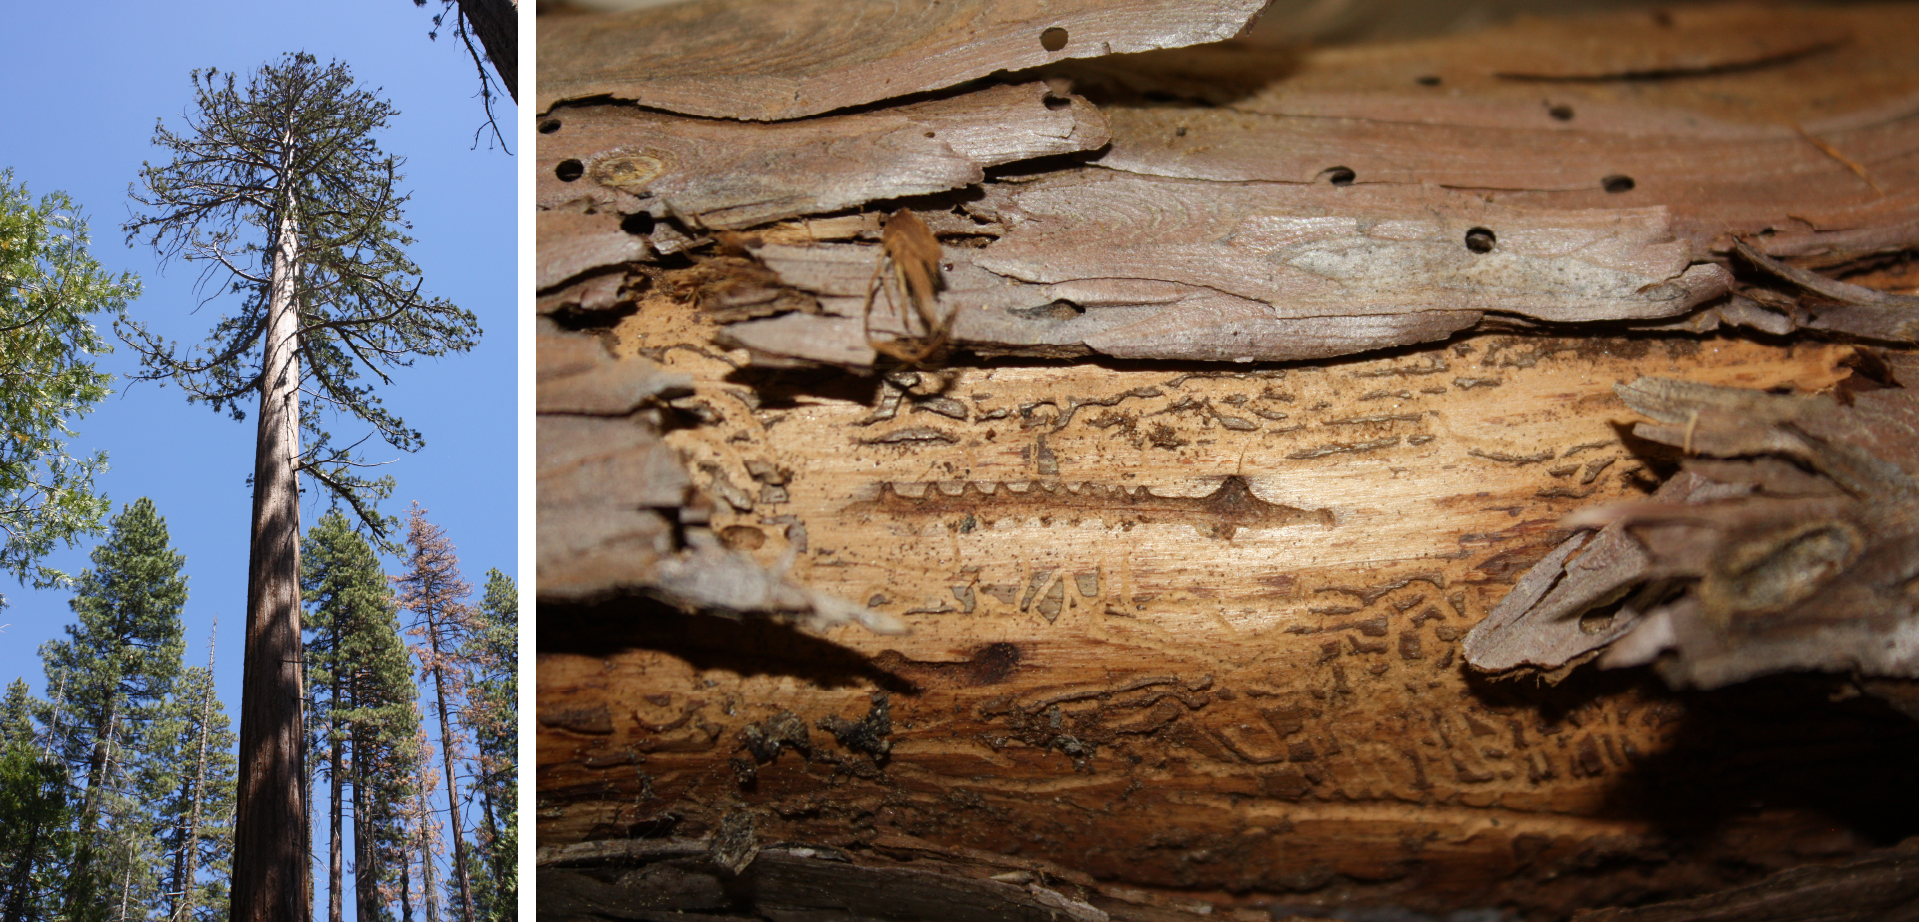 Photos show thinning foliage and beetle galleries on beetle-infected giant sequoia tree.